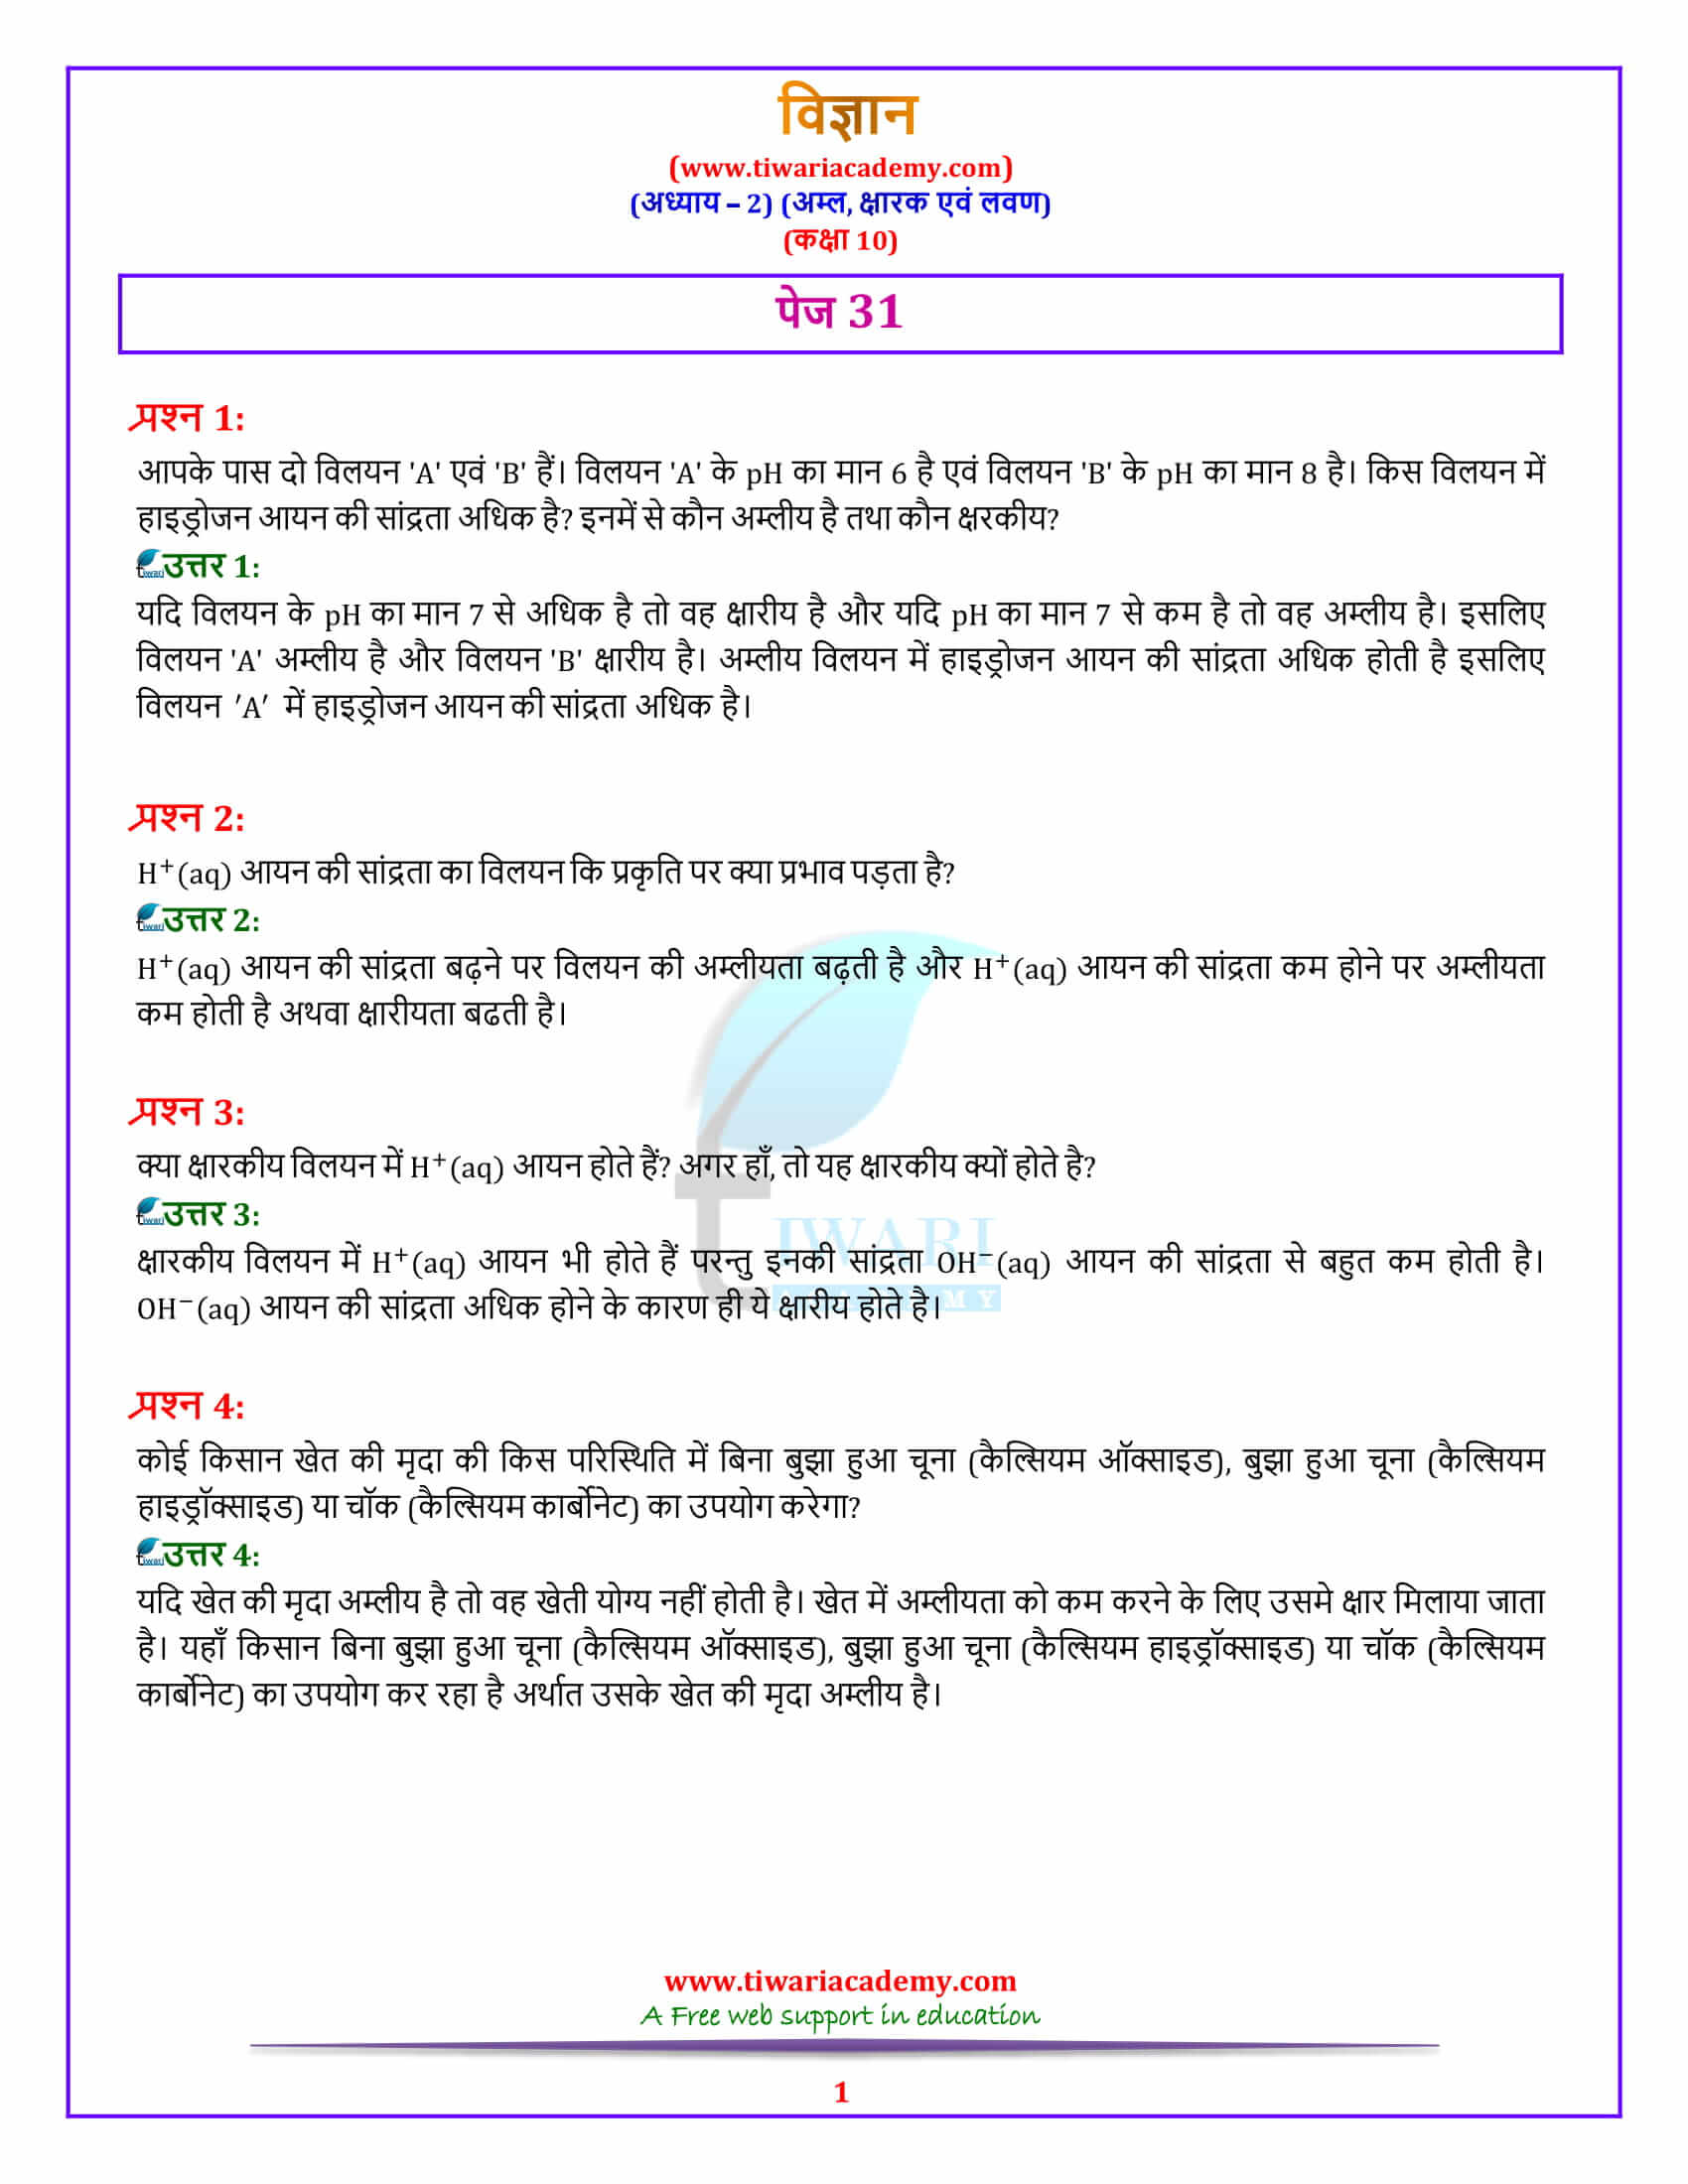 10 Science Chapter 2 Acids, Bases and Salts Intext questions पेज 31 के उत्तर